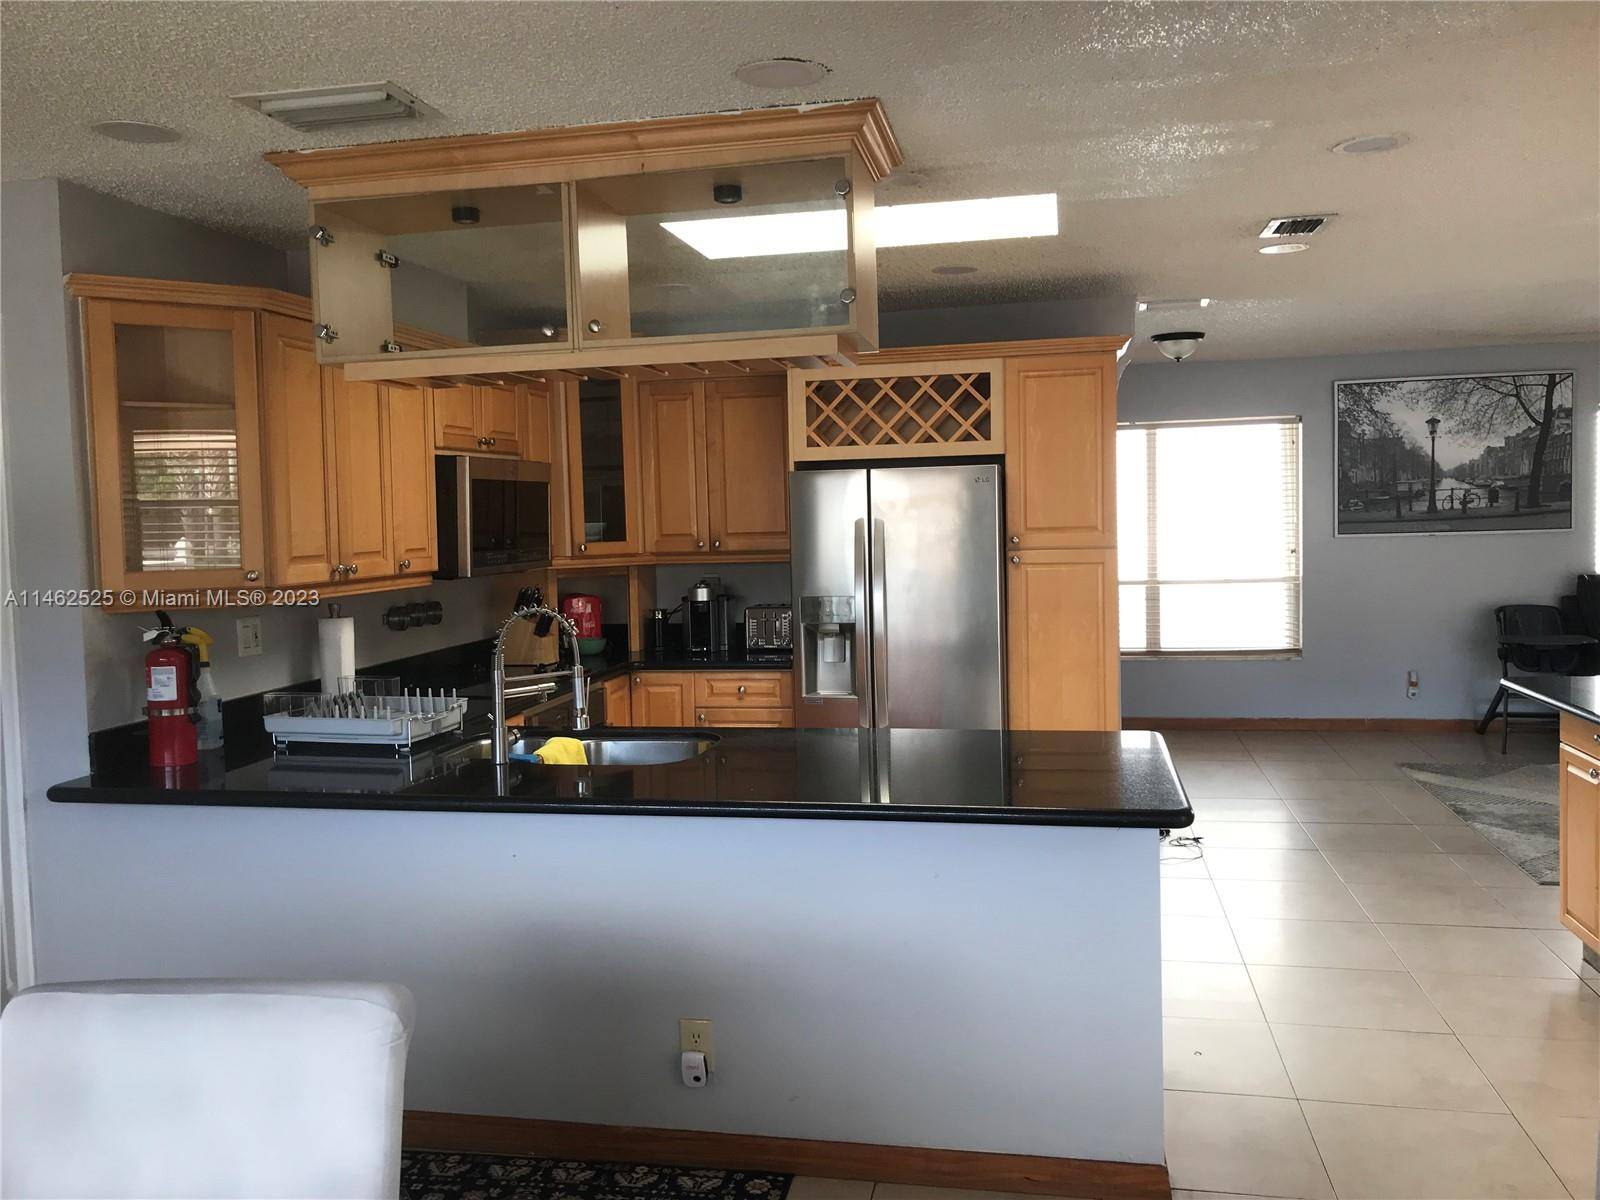 Beautiful furnished 3 bed 2 bath home located in the Lakes area, minutes away from the beach and downtown Hollywood shops and restaurants.